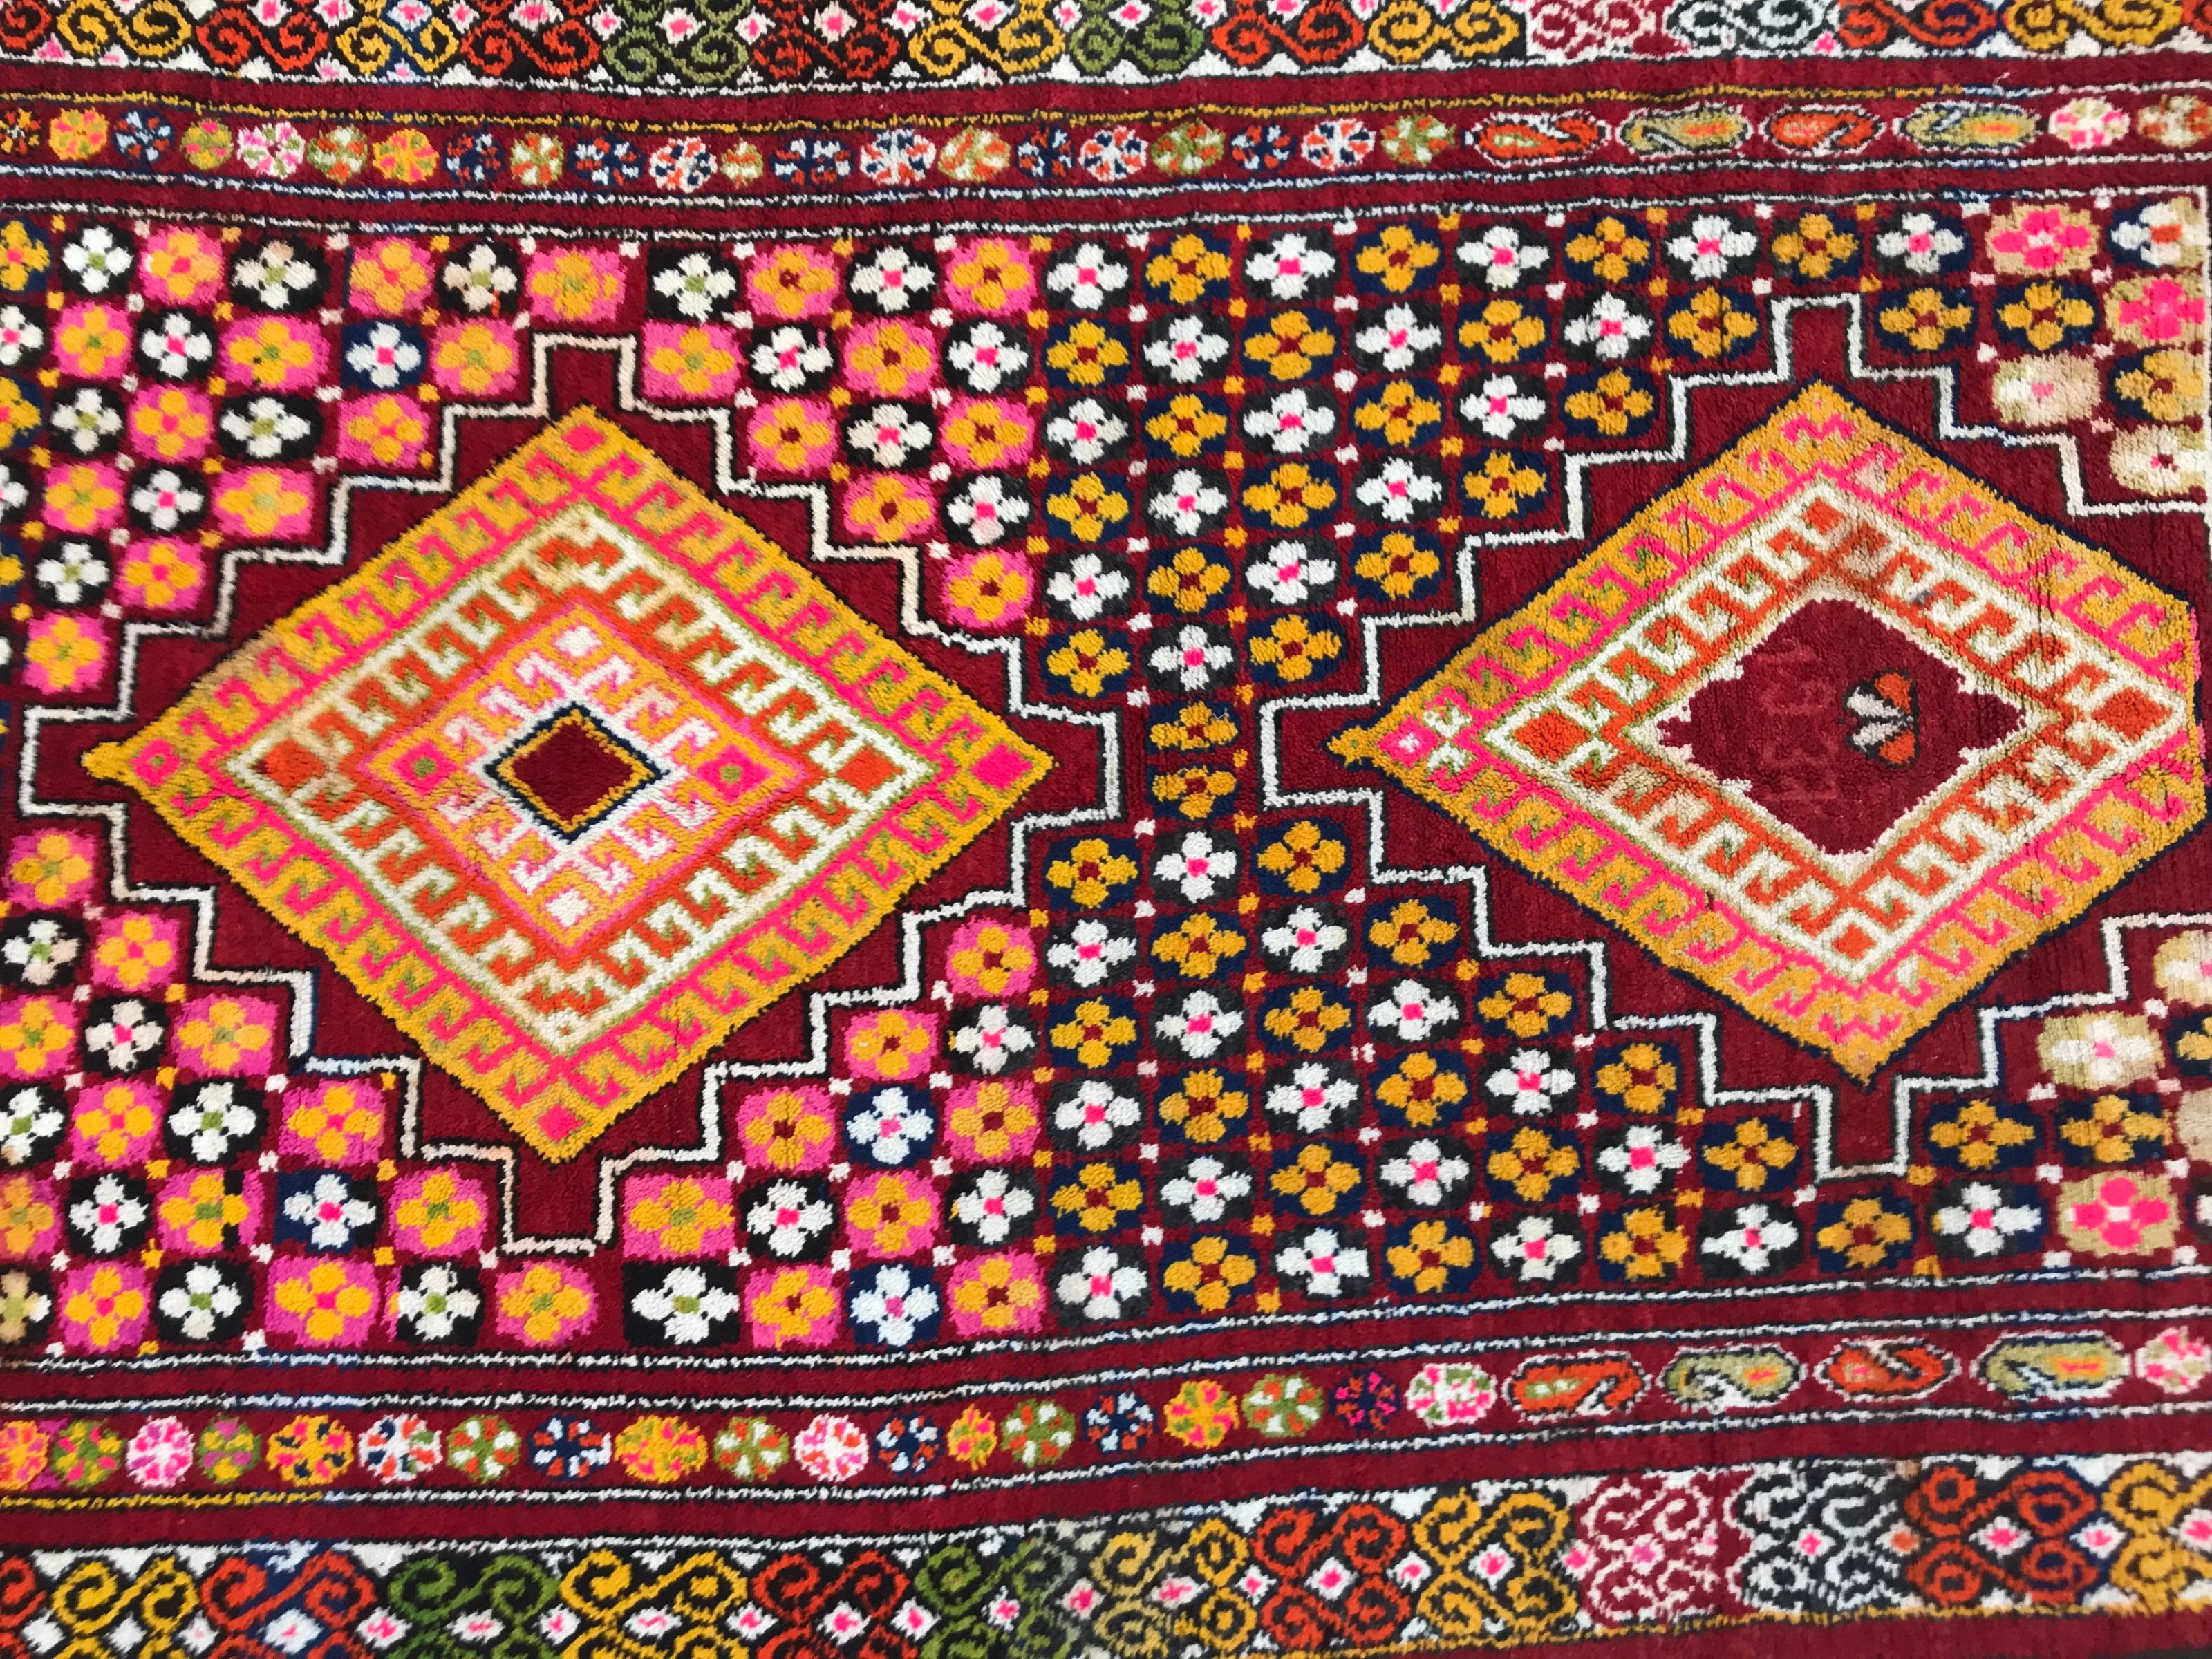 Wonderful Moroccan rug with nice geometrical tribal design and beautiful colors with orange, pink, yellow, green, purple and black, dated 1937, entirely hand knotted with wool on wool foundation.

✨✨✨
